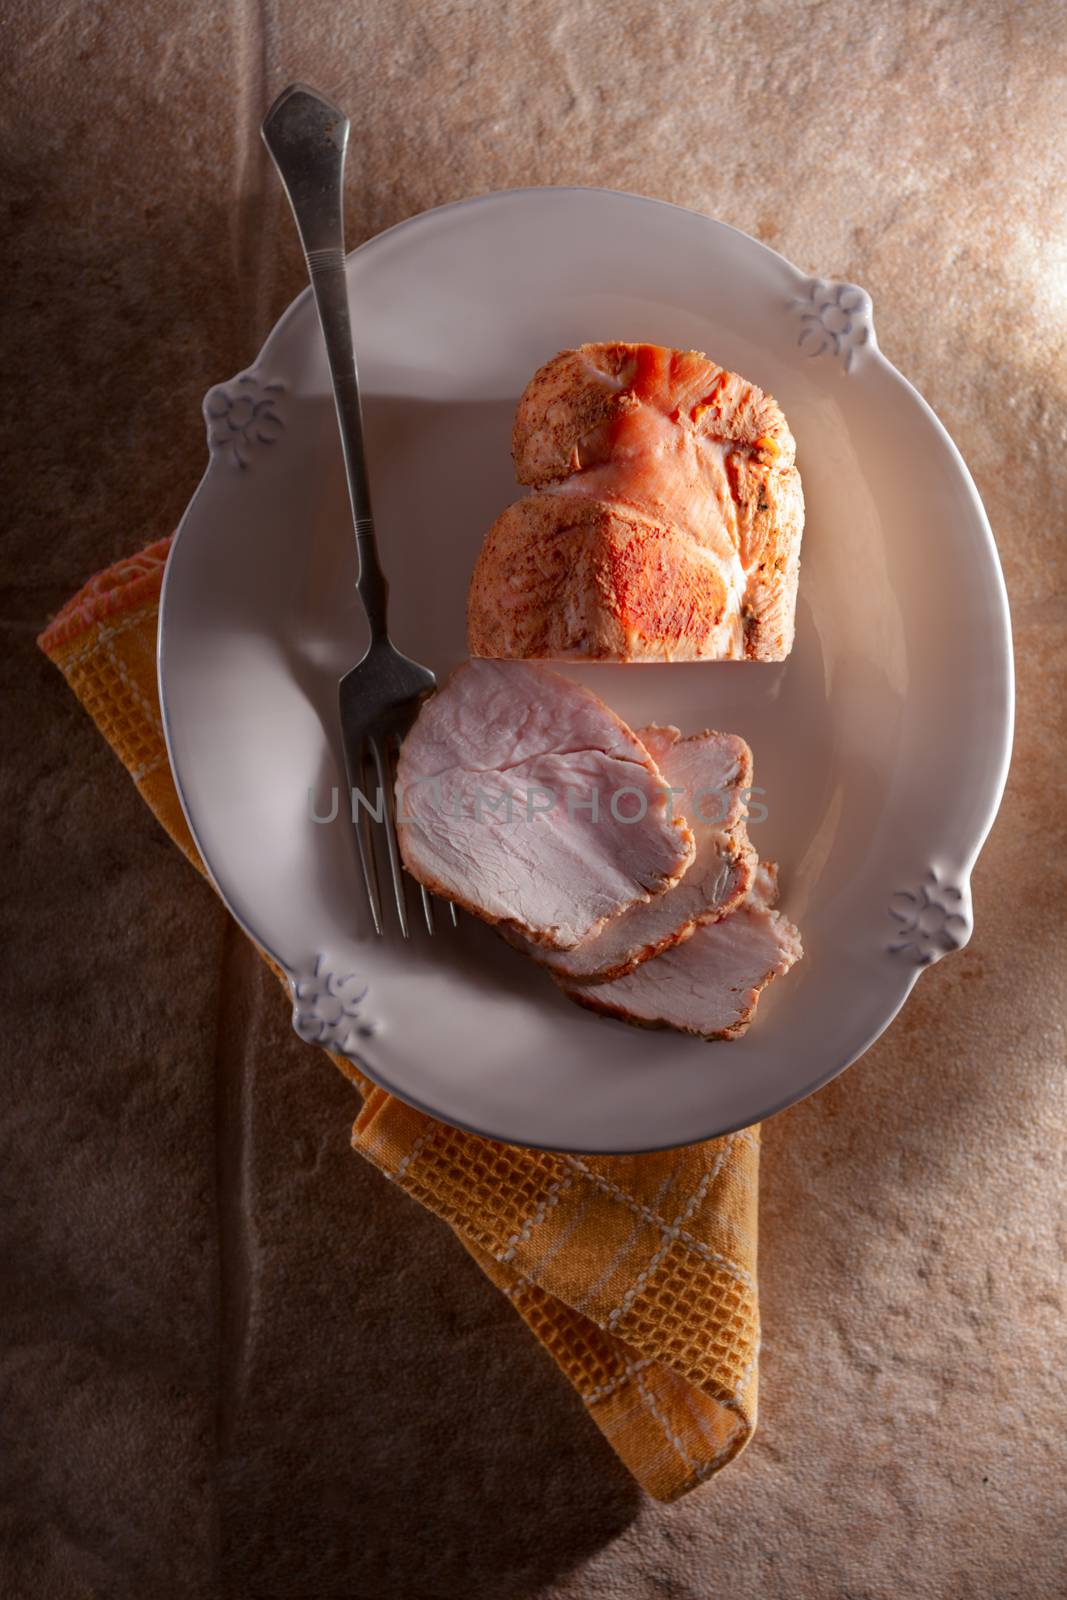 Turkey Breast Roasted And Sliced on the plate